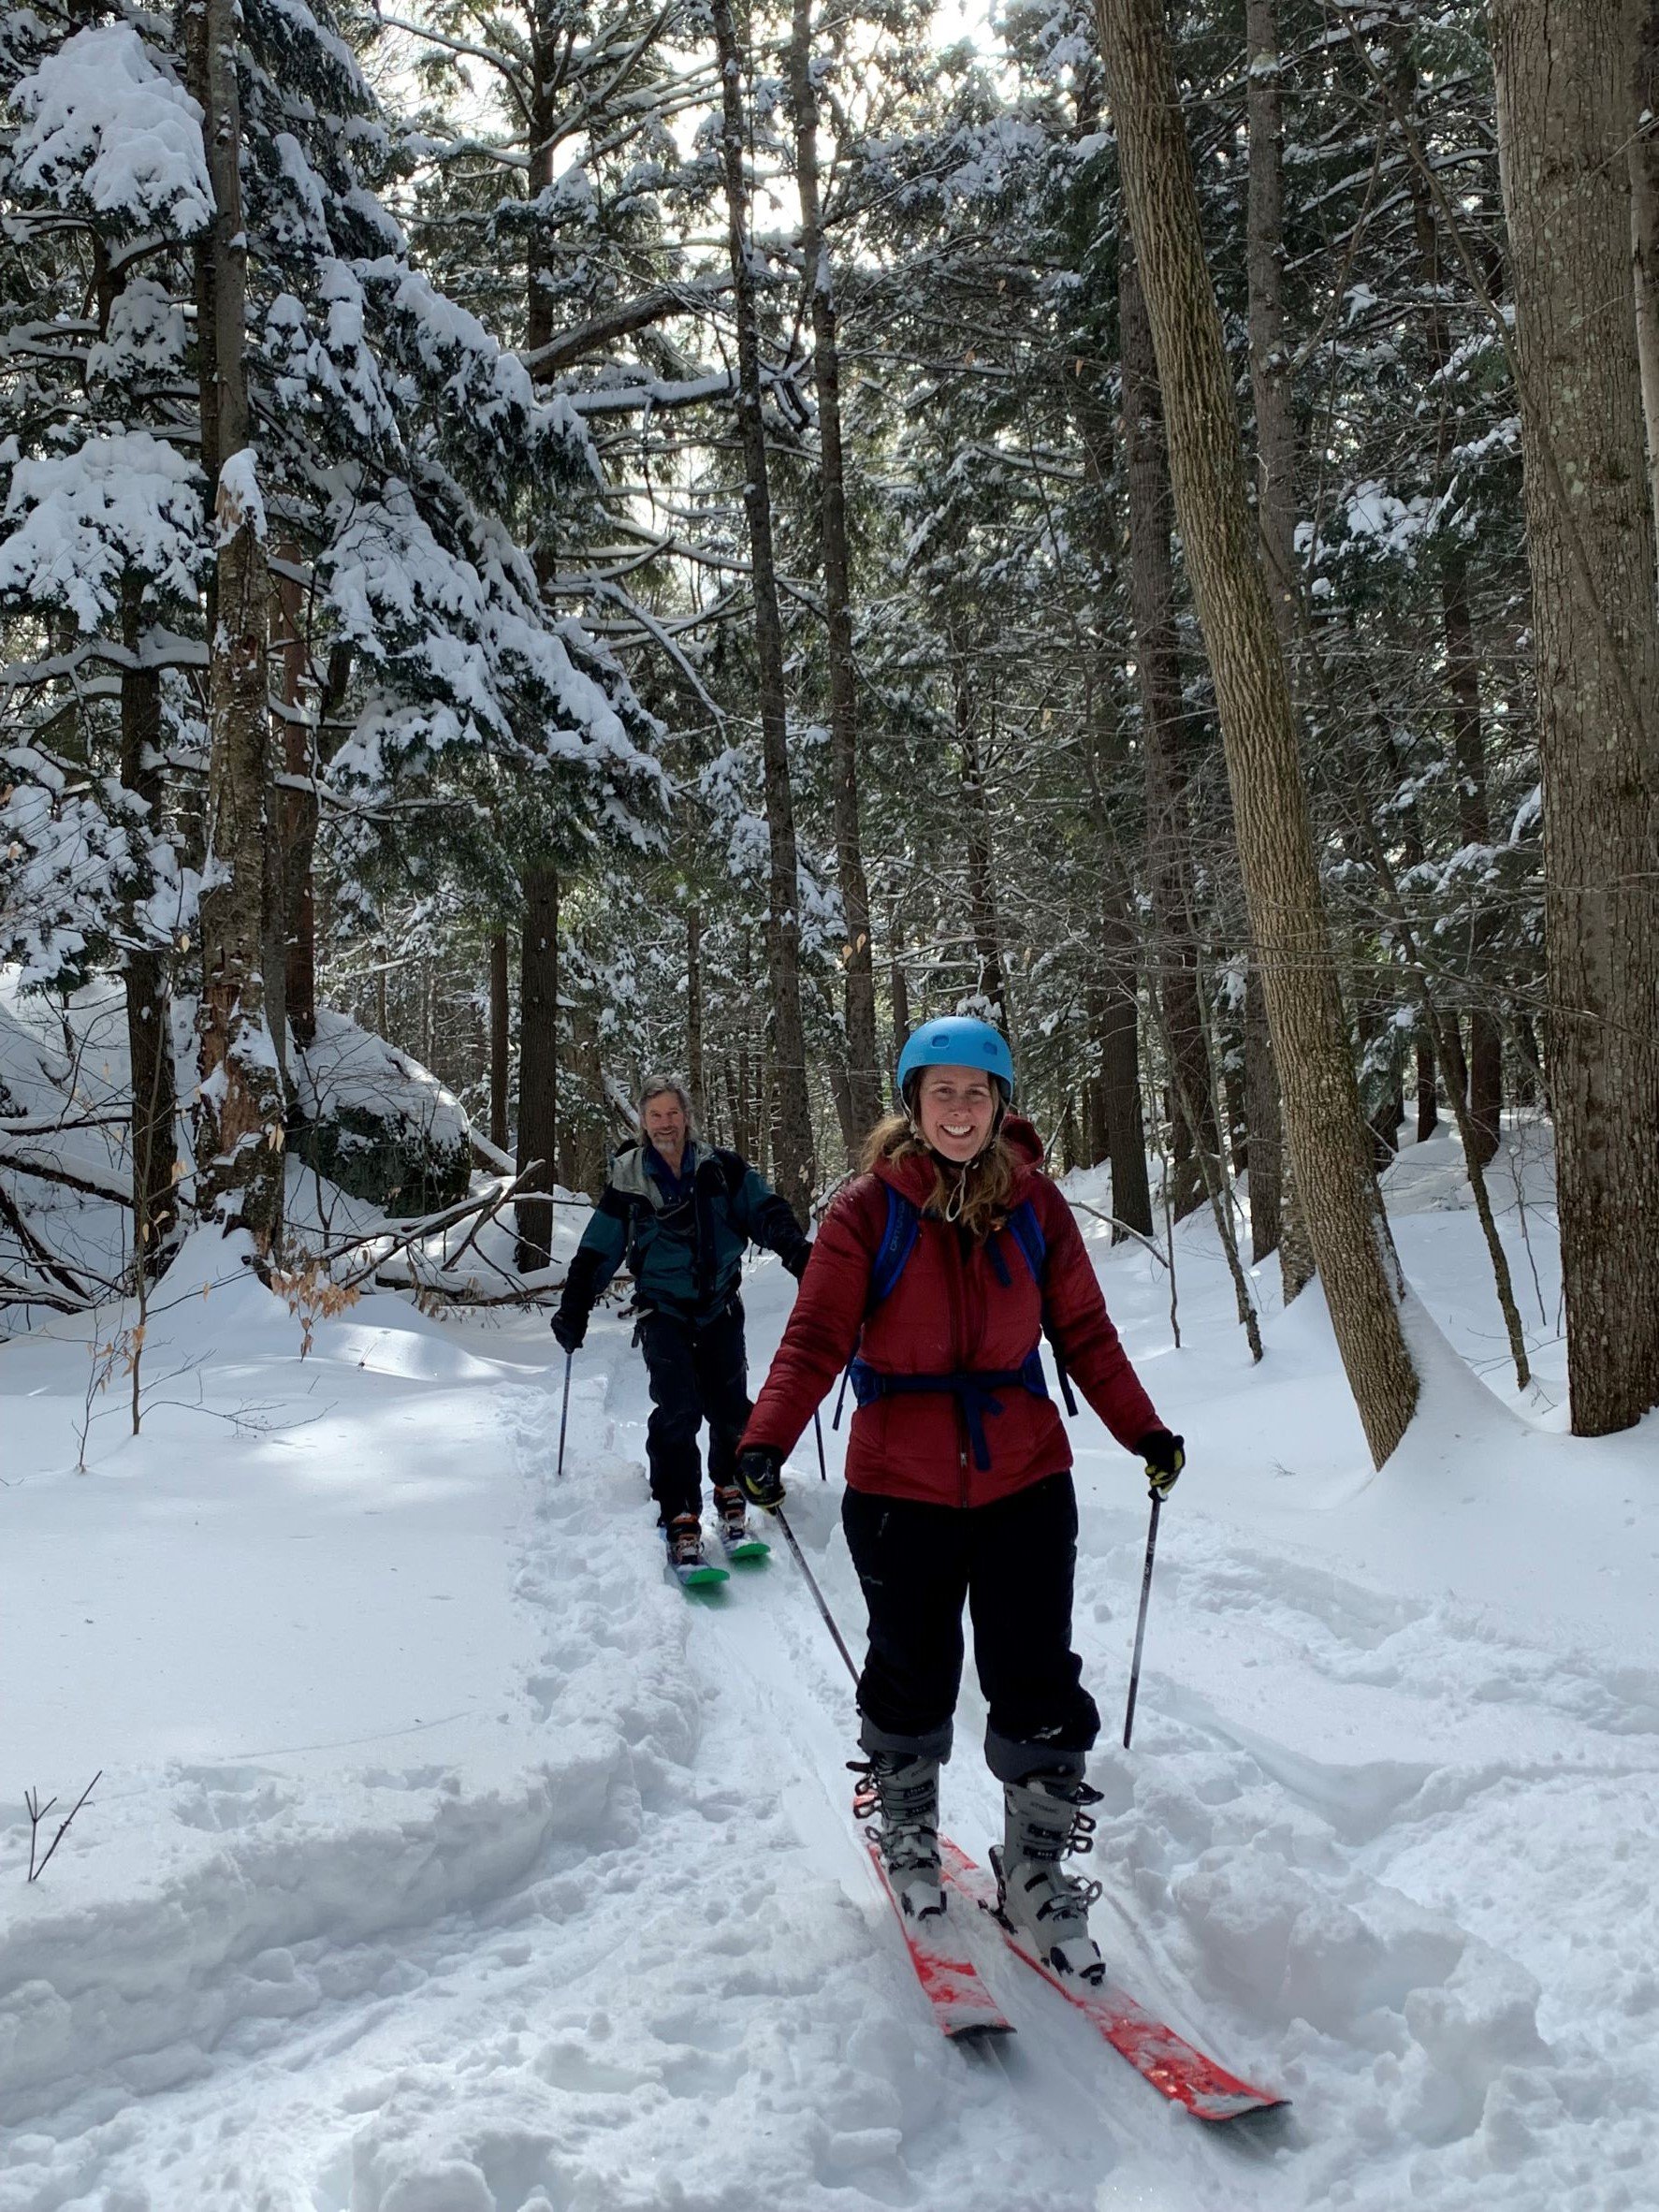   Bill Minter and Georgiana Birmingham joined more than 20 others on snowshoes and skis for the annual Winterfest backcountry "descent" expedition from Blush Hill Country Club down to Little River on Sunday. Photo by Lisa Scagliotti  